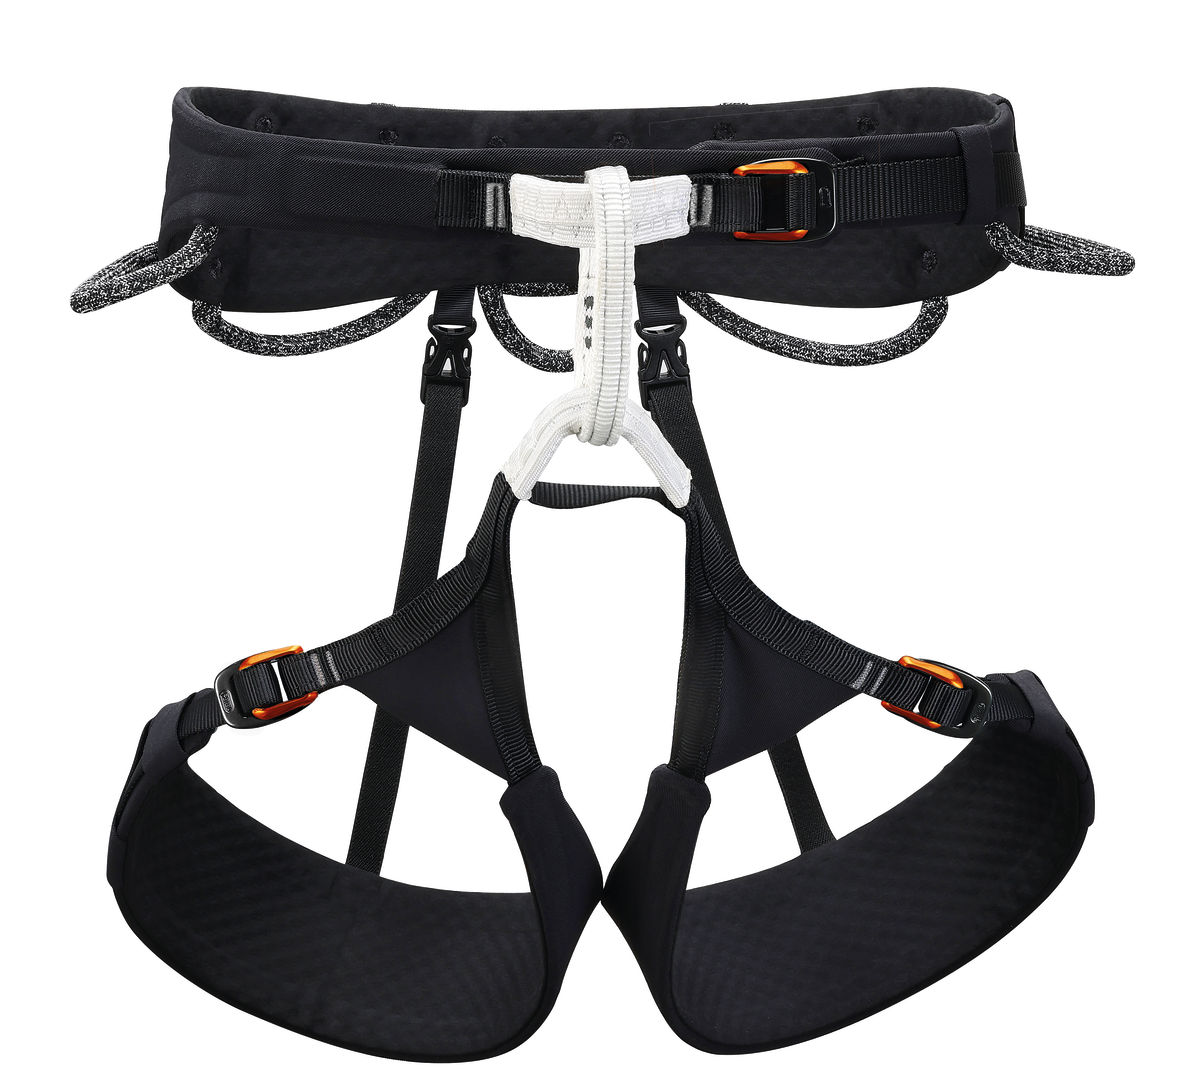 AQUILA, Very comfortable climbing and mountaineering harness for